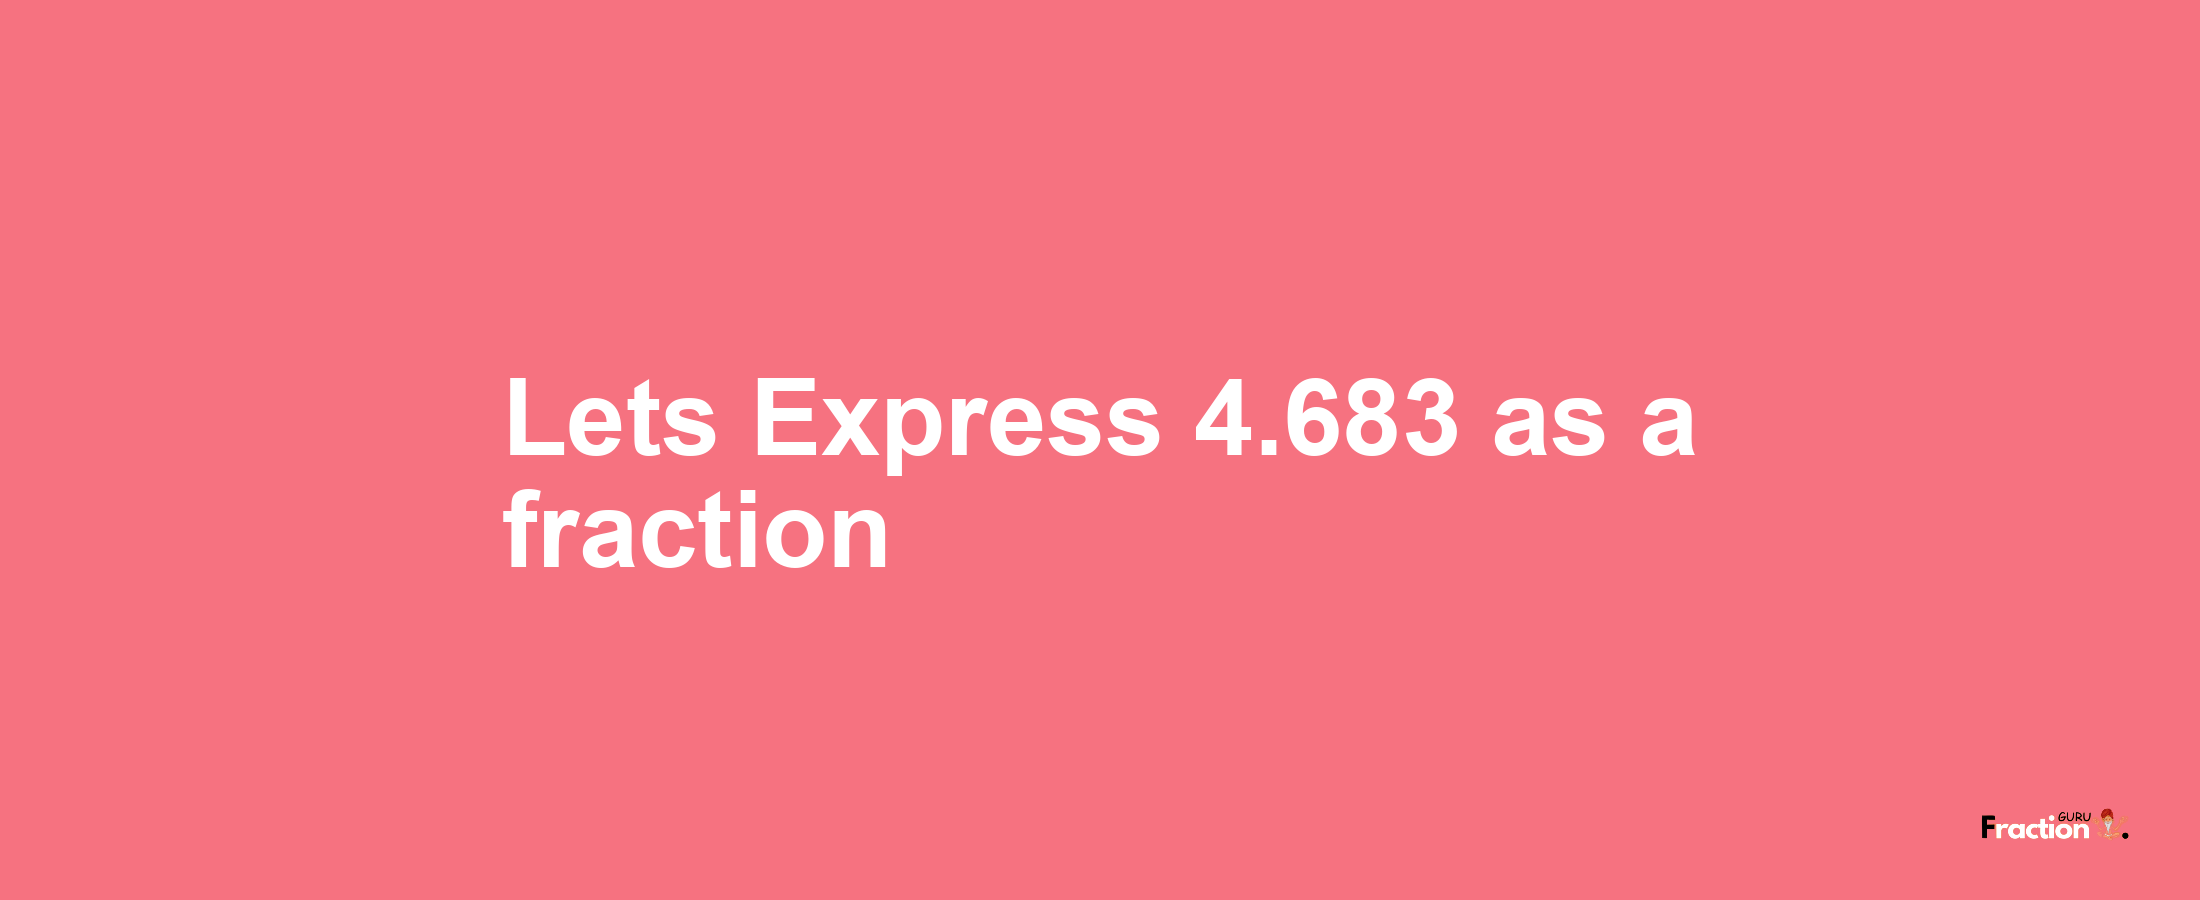 Lets Express 4.683 as afraction